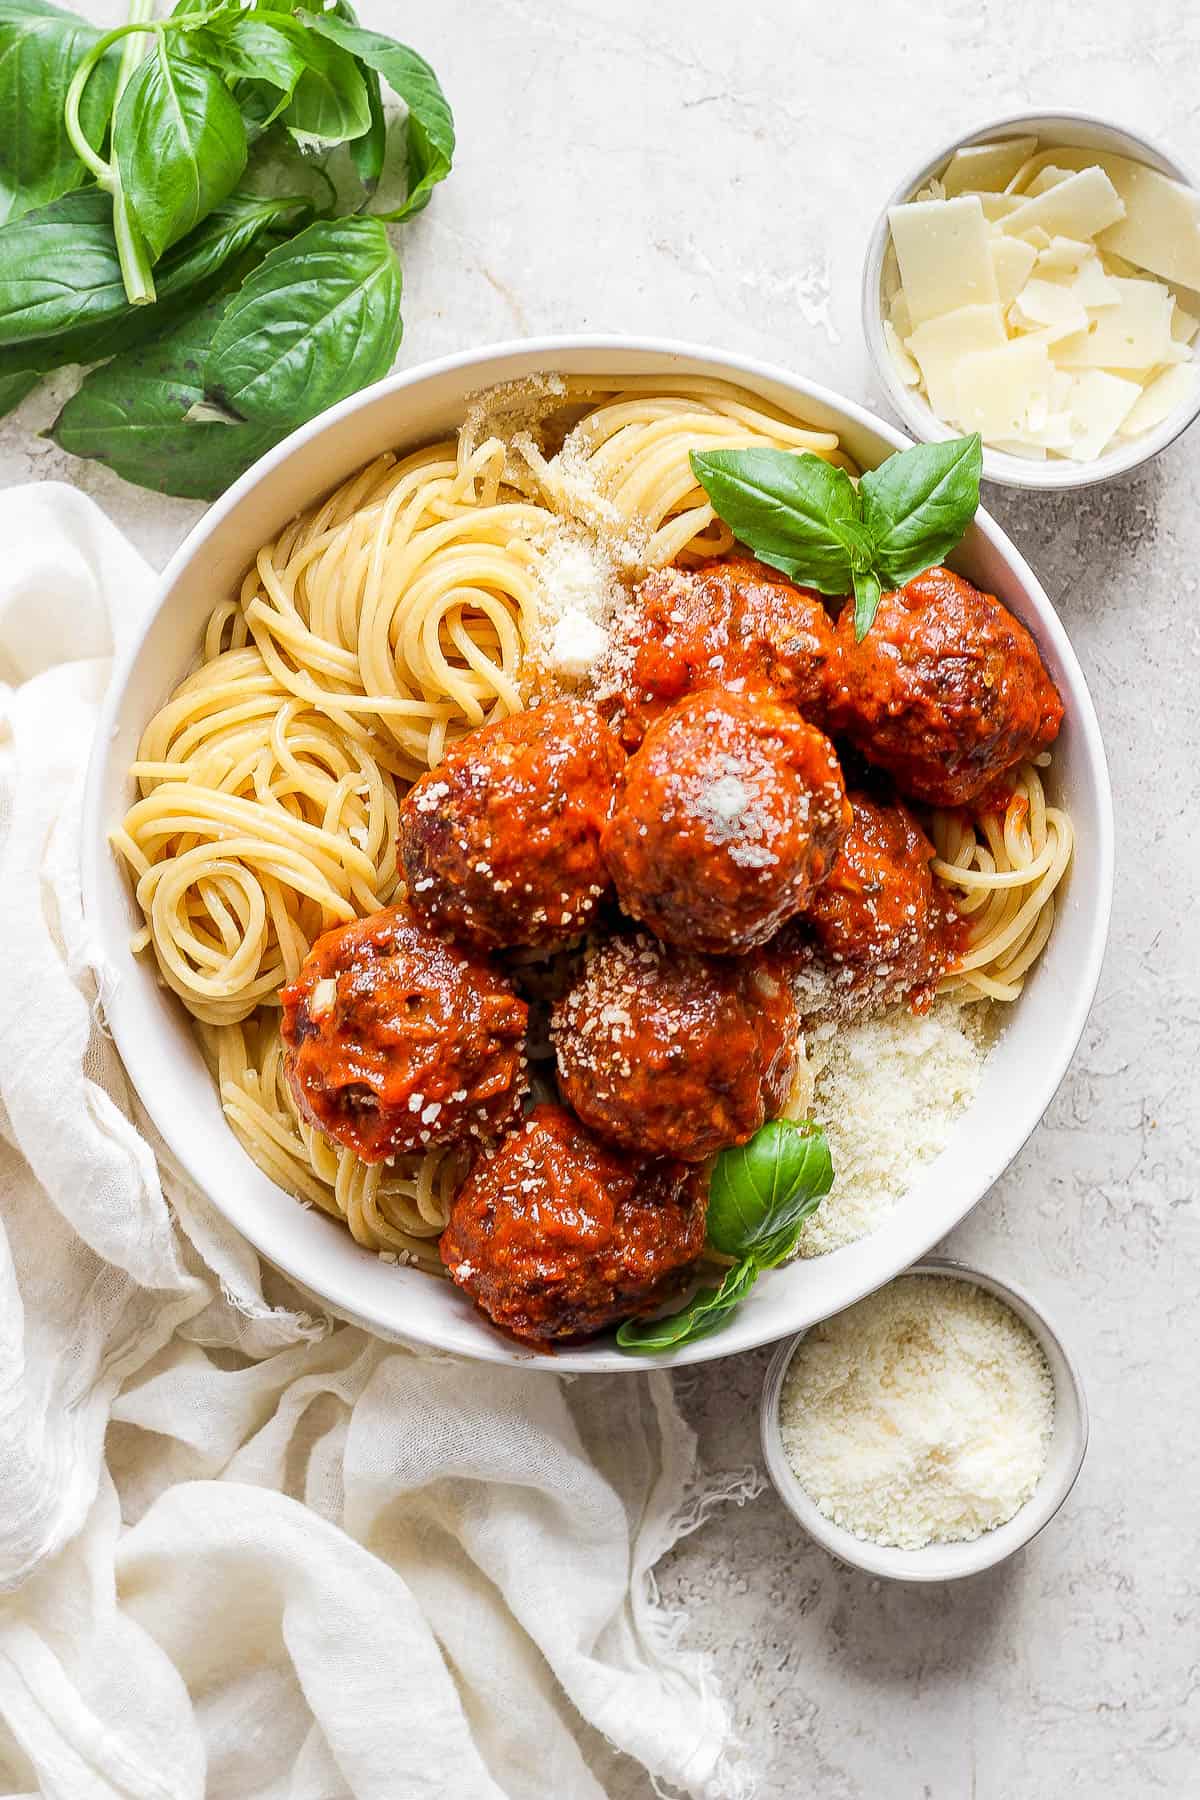 Smoked meatballs and spaghetti in a white bowl.